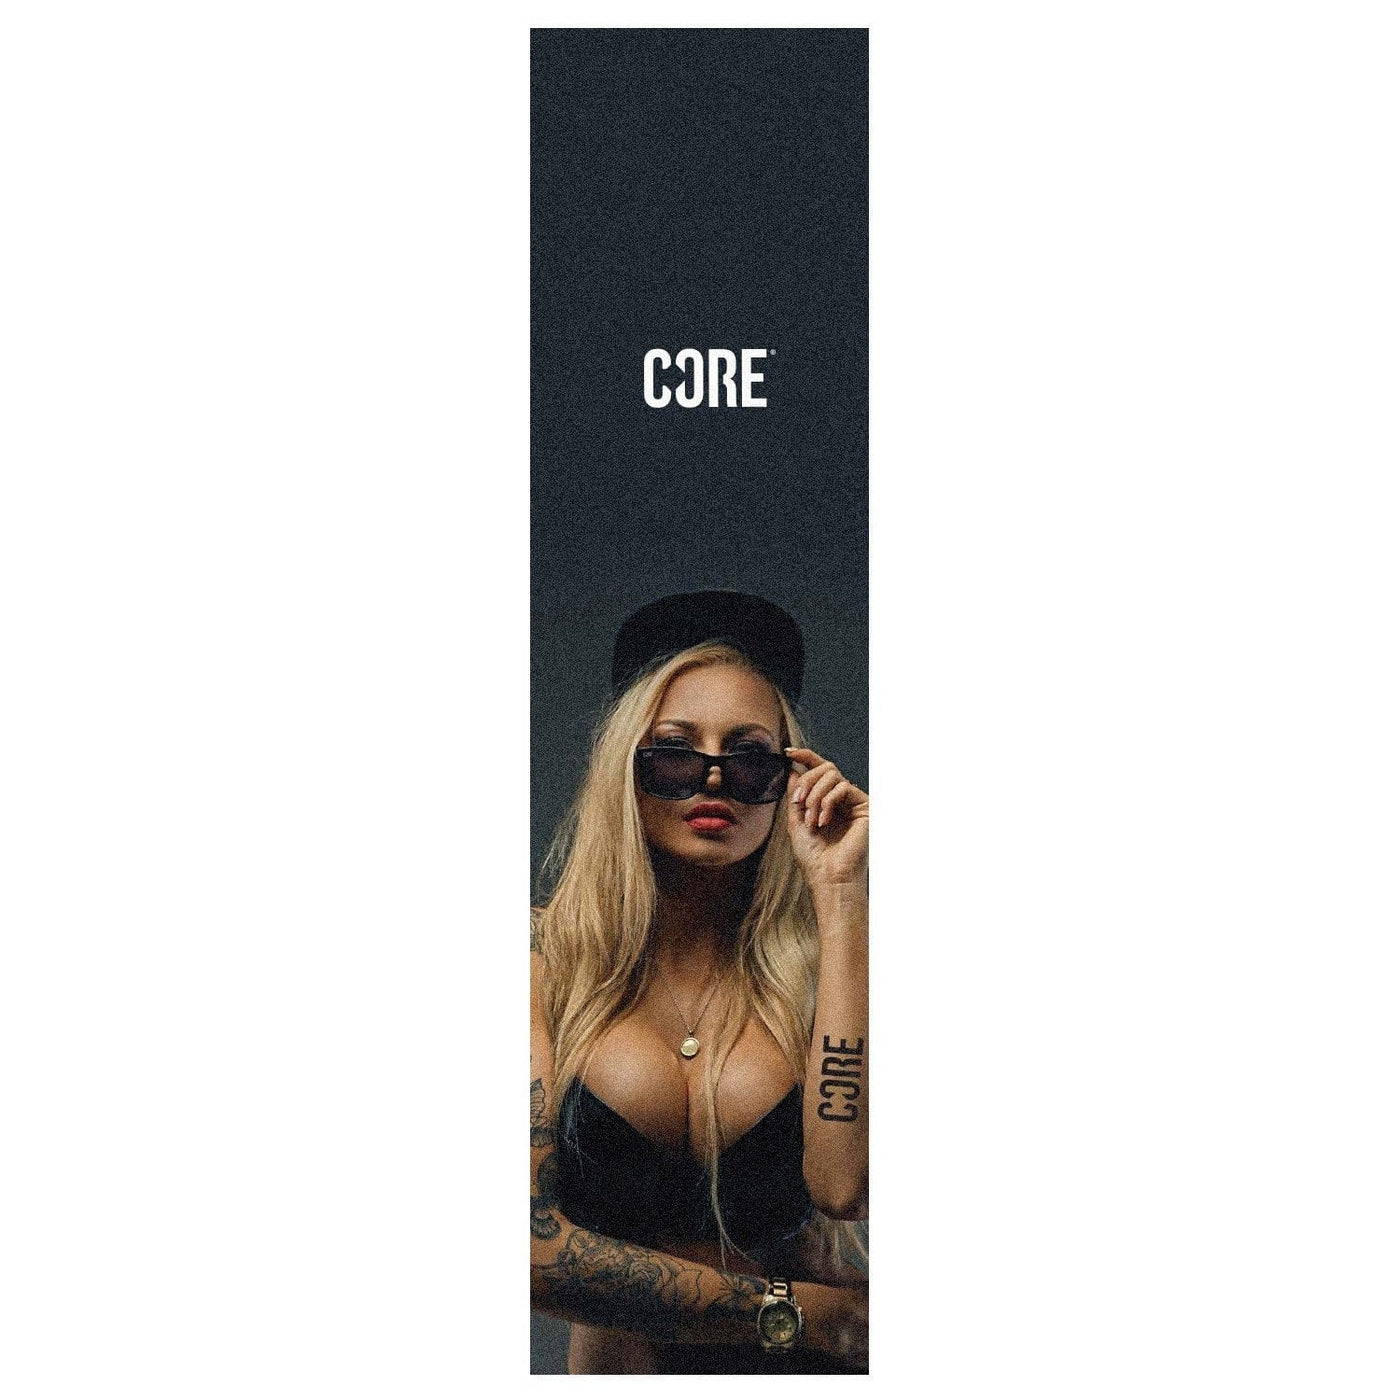 Core Scooter Grip Tape Hot Girl I Grip Tape Scooter